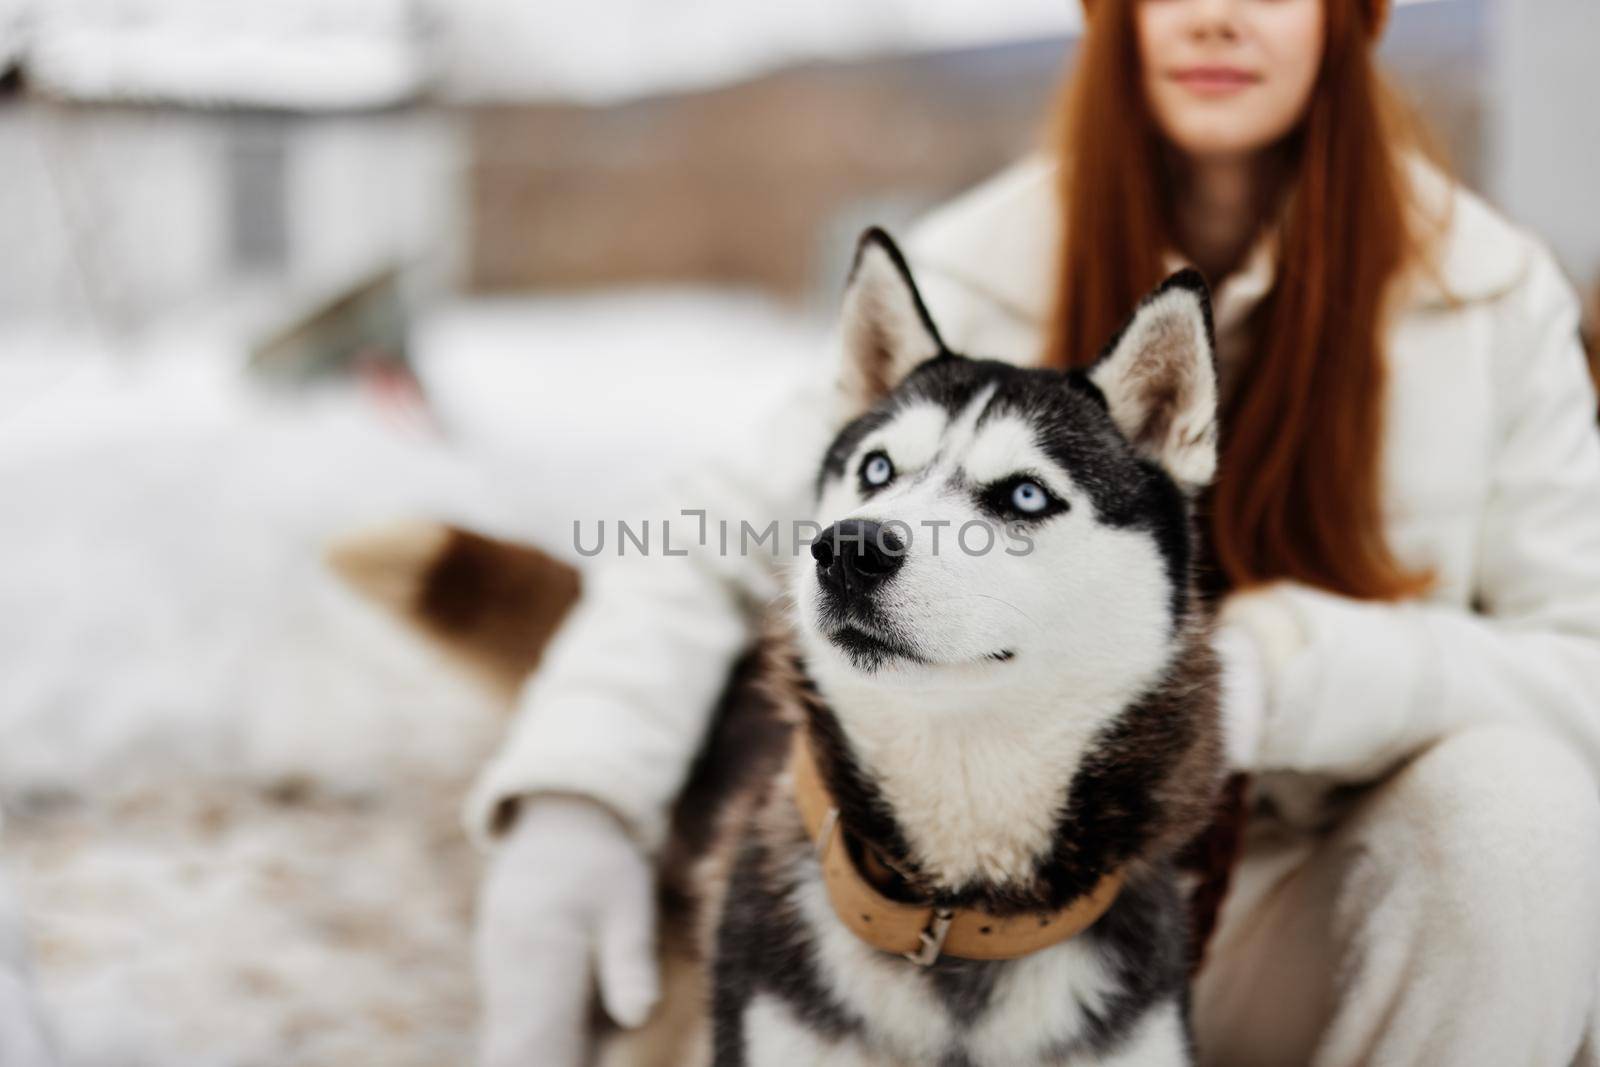 young woman with husky winter landscape walk friendship fresh air by SHOTPRIME